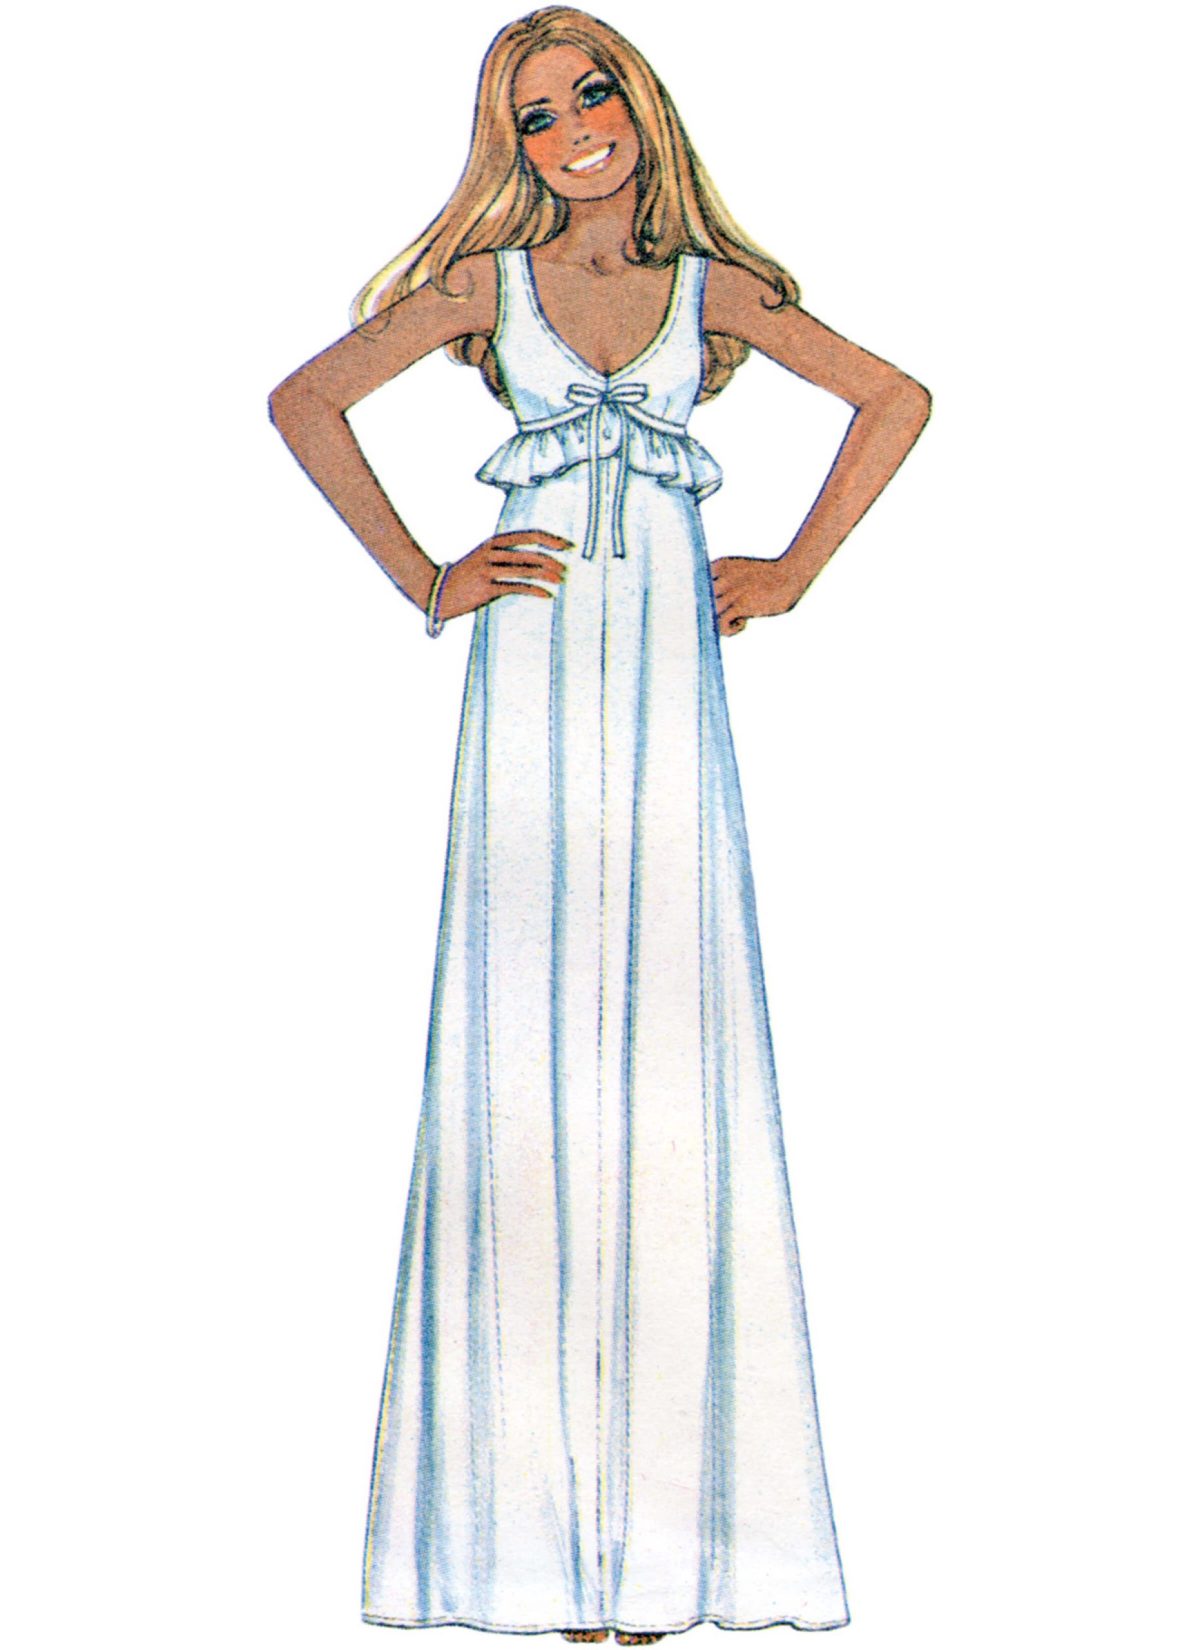 McCall's Sewing Pattern M8430 Vintage Misses' Robe and Nightgown